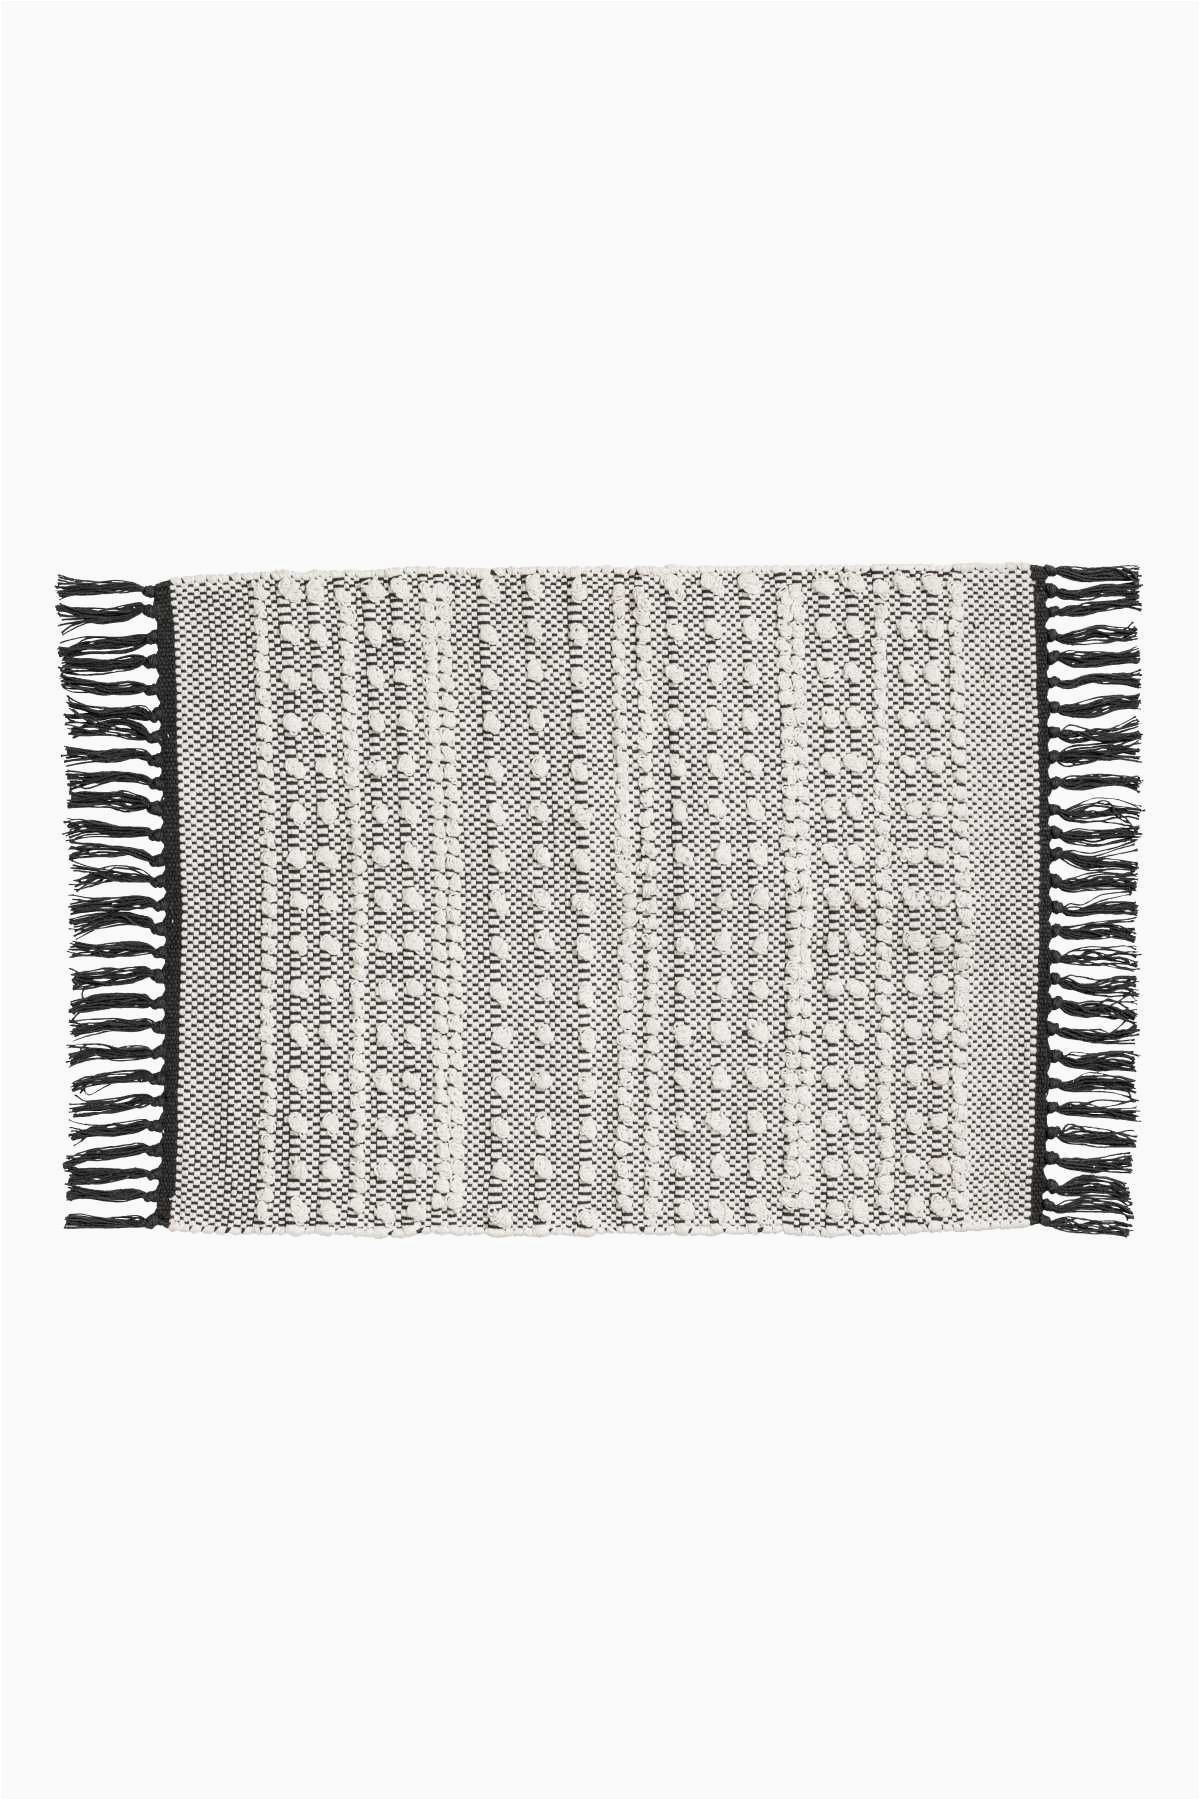 Charcoal Gray Bathroom Rugs White Charcoal Gray Bath Mat In Jacquard Weave Cotton